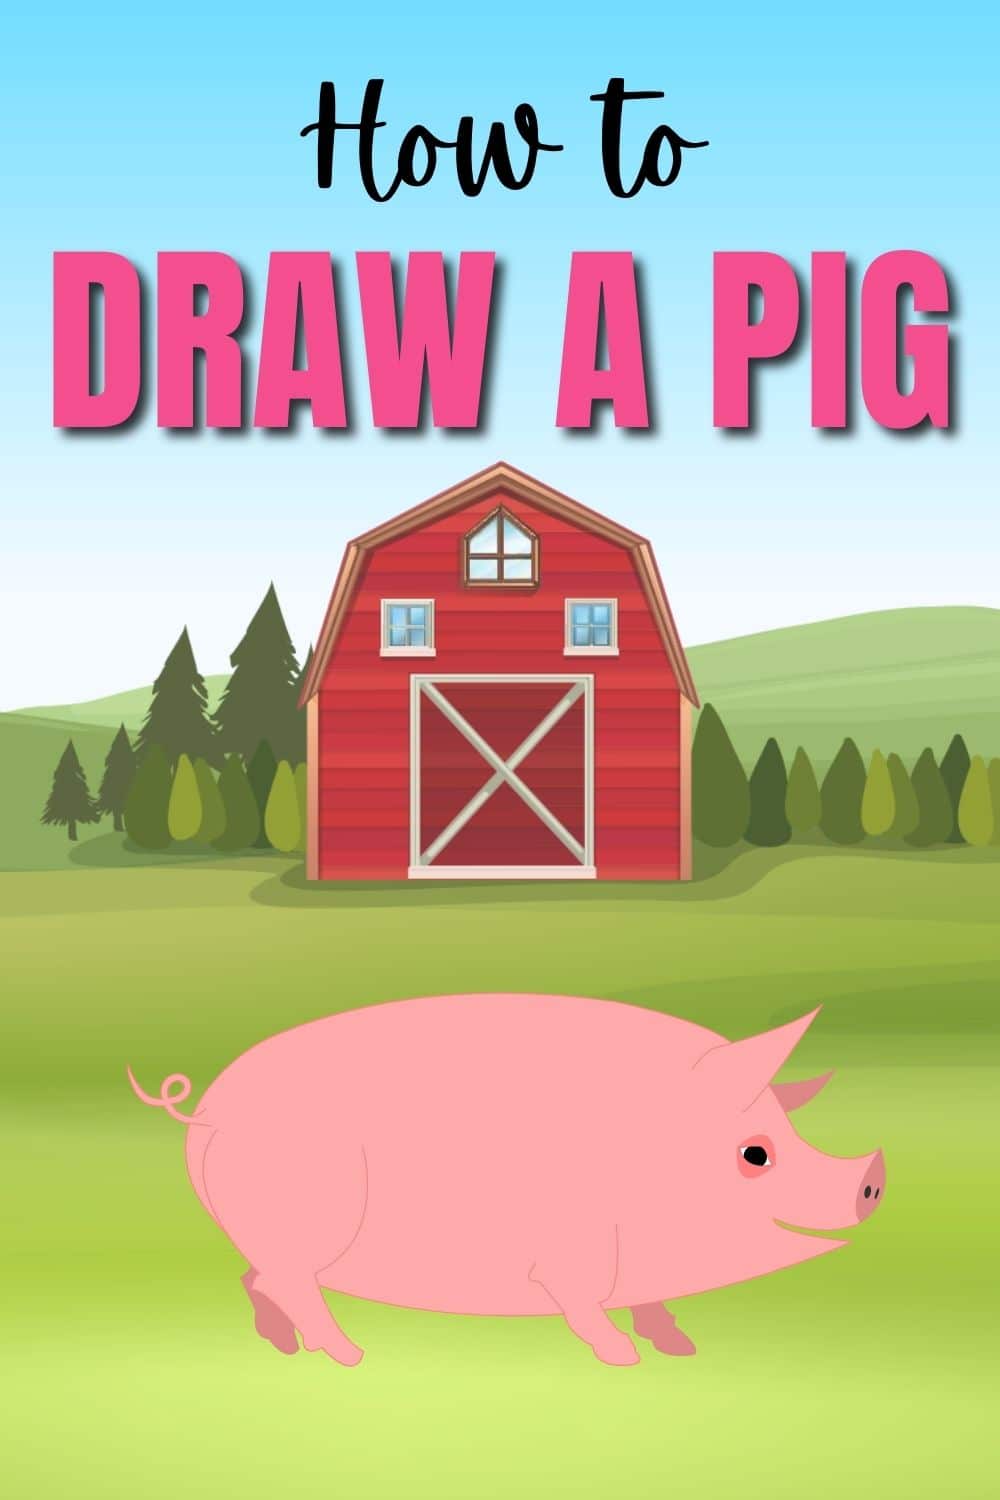 title text reading How to Draw a Pig with a barn, farm, and pig graphic under it.